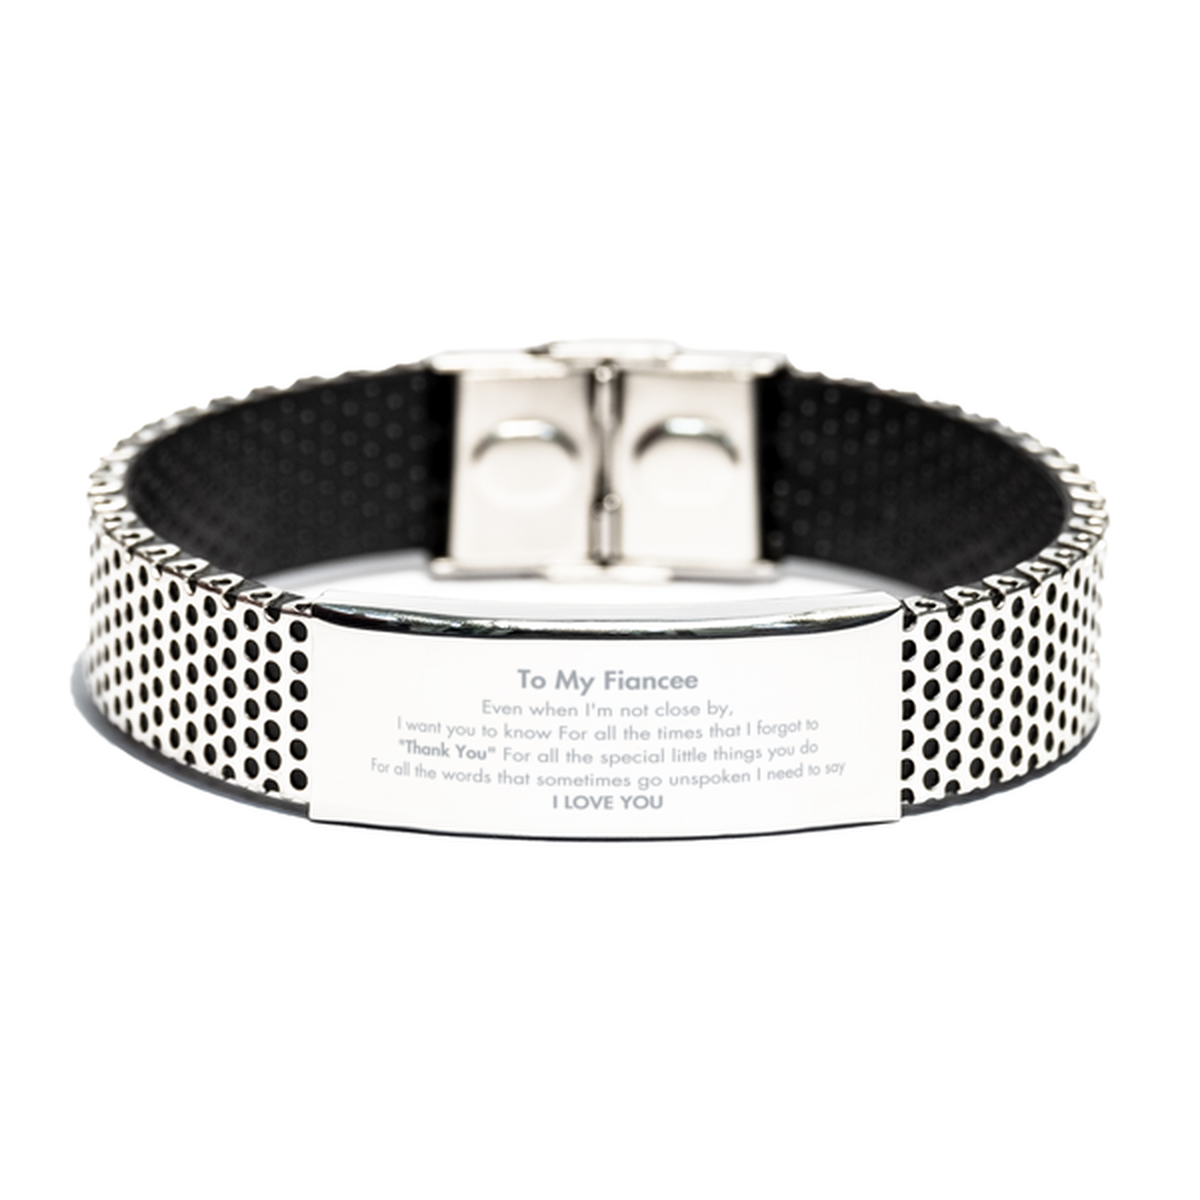 Thank You Gifts for Fiancee, Keepsake Stainless Steel Bracelet Gifts for Fiancee Birthday Mother's day Father's Day Fiancee For all the words That sometimes go unspoken I need to say I LOVE YOU